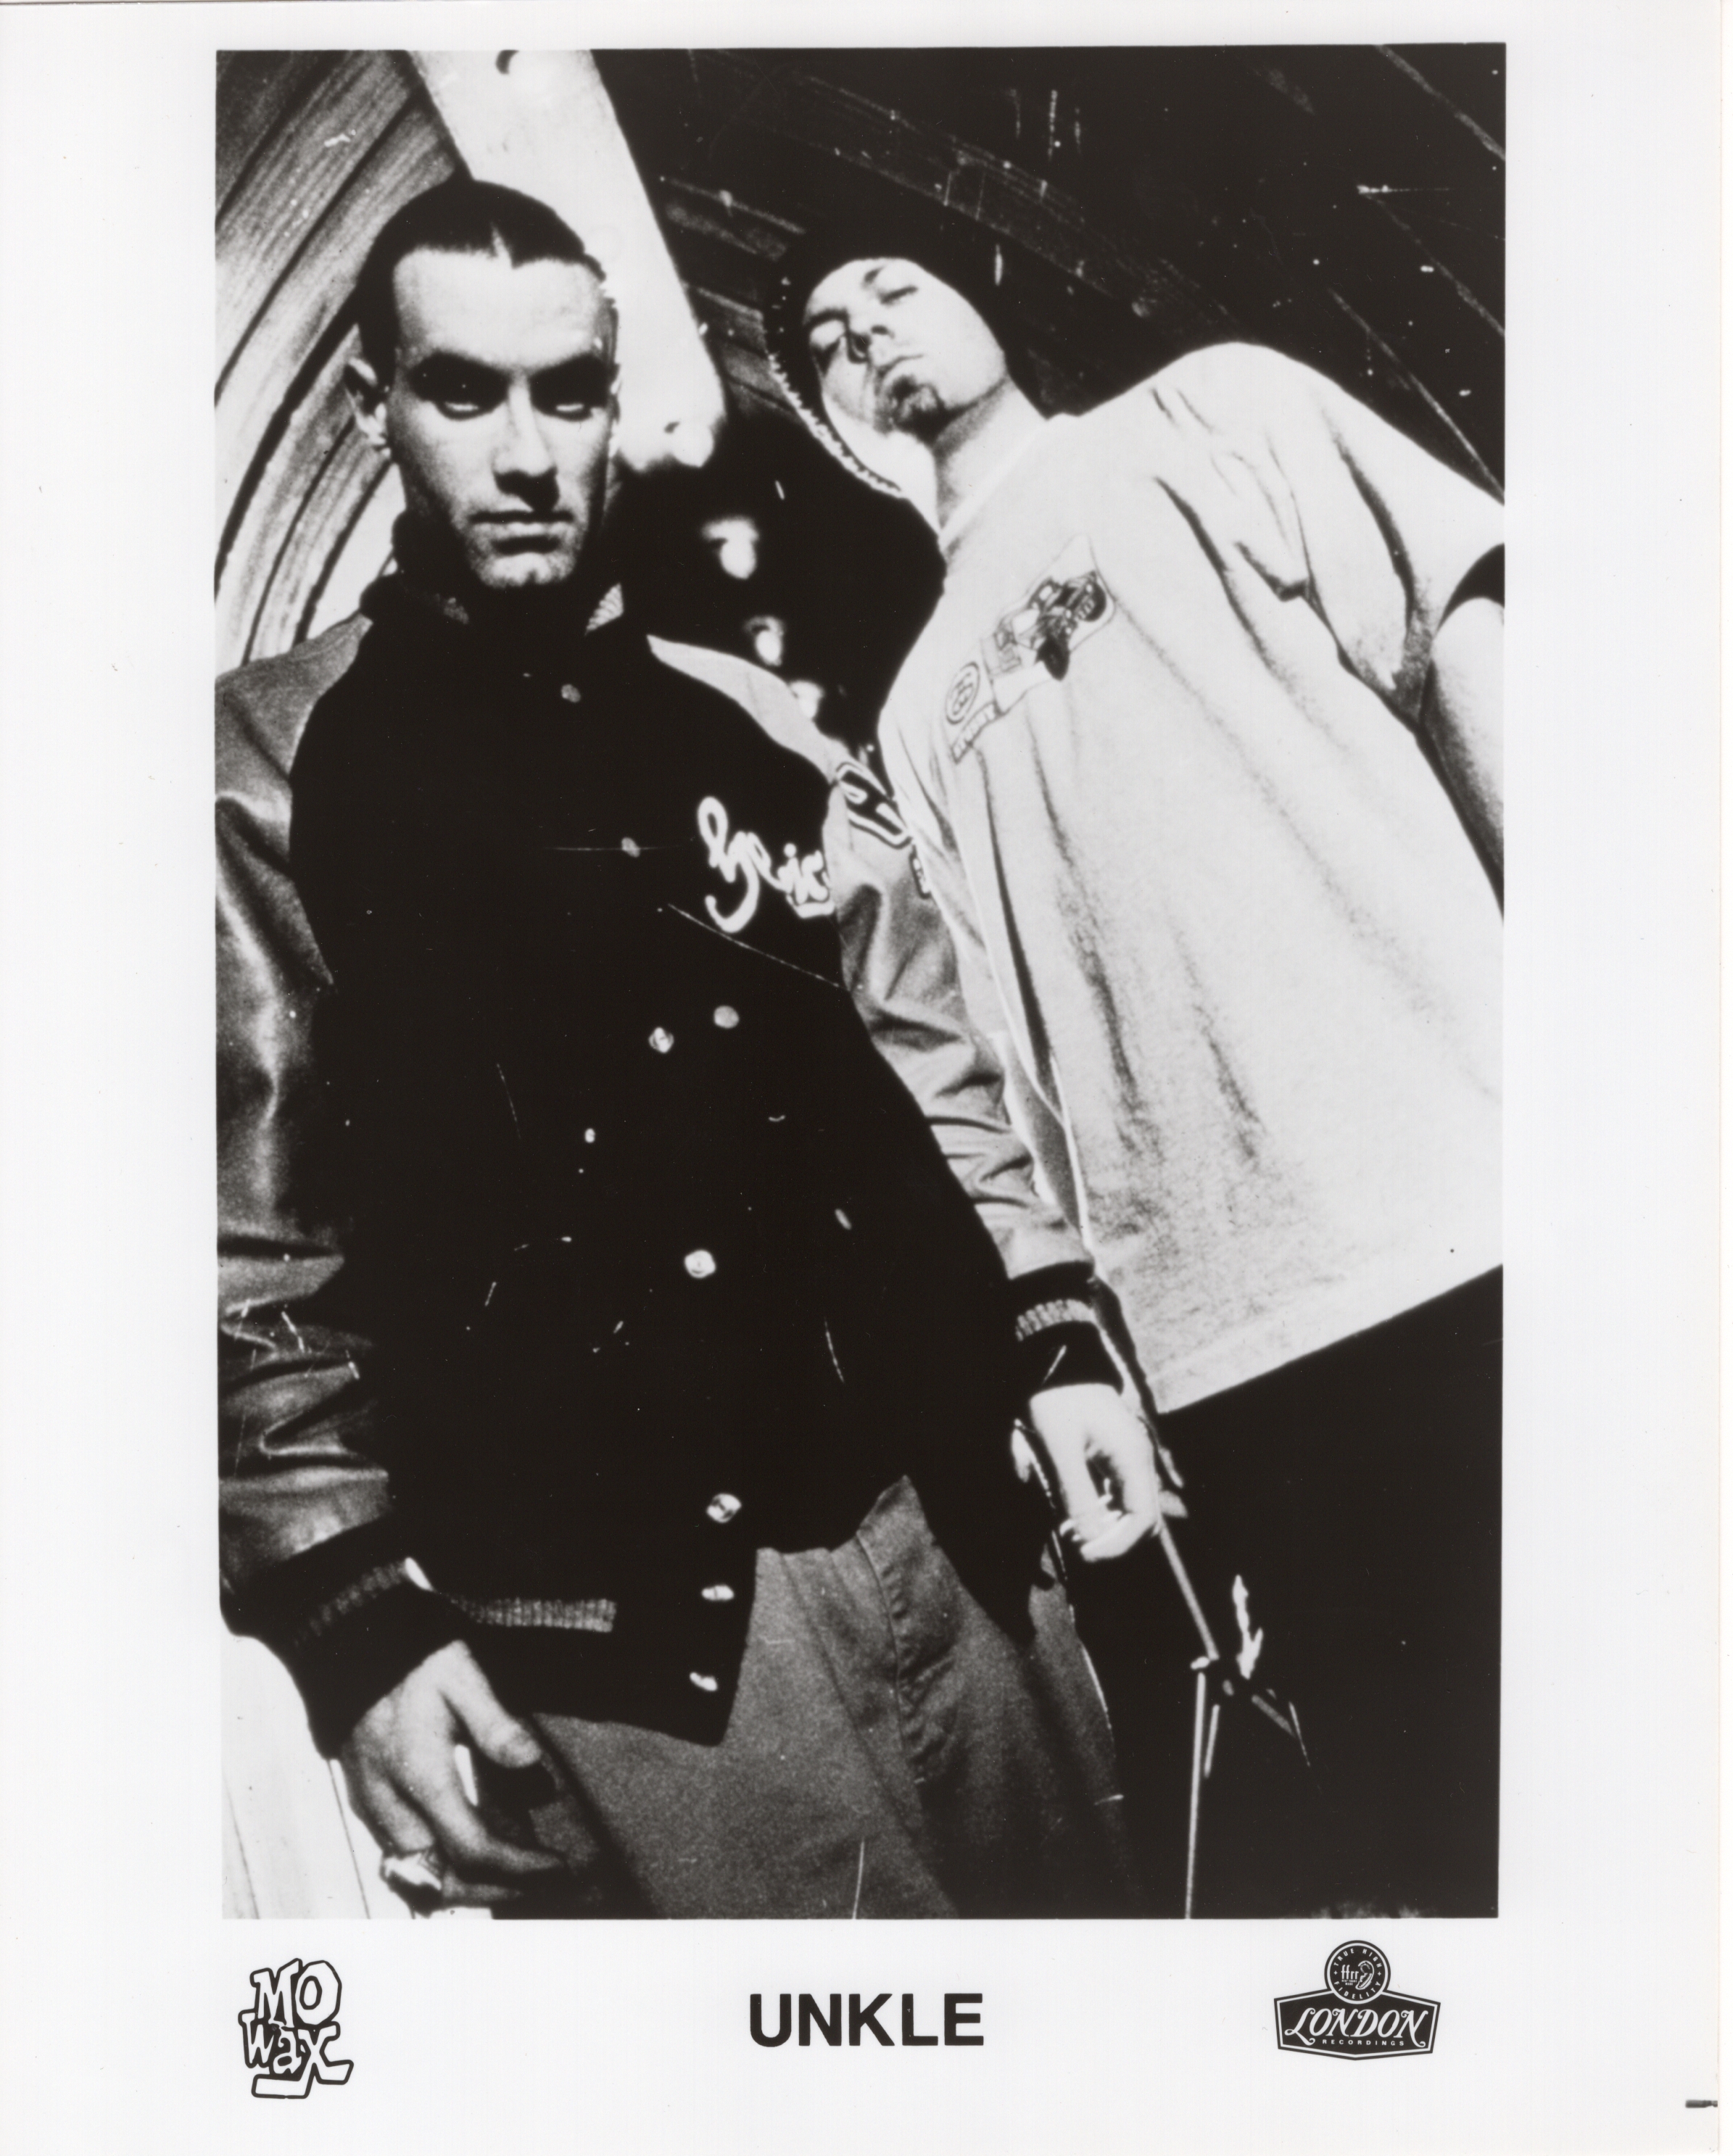 1998 James Lavelle and DJ Shadow